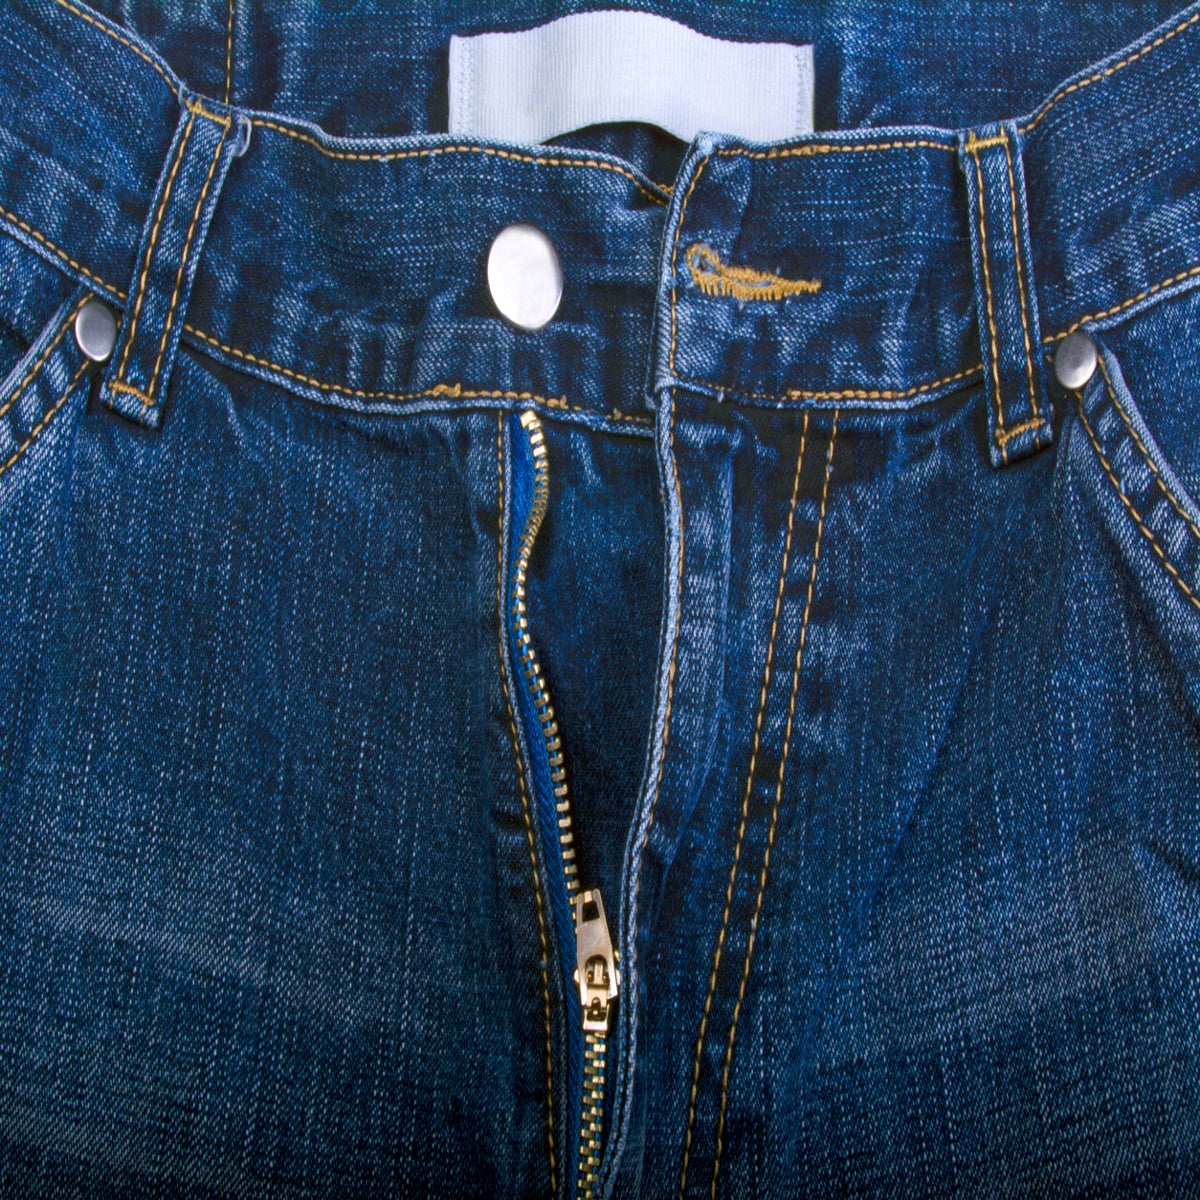  Zipper Holder Upper for Jeans - Clasp to Keep Pants